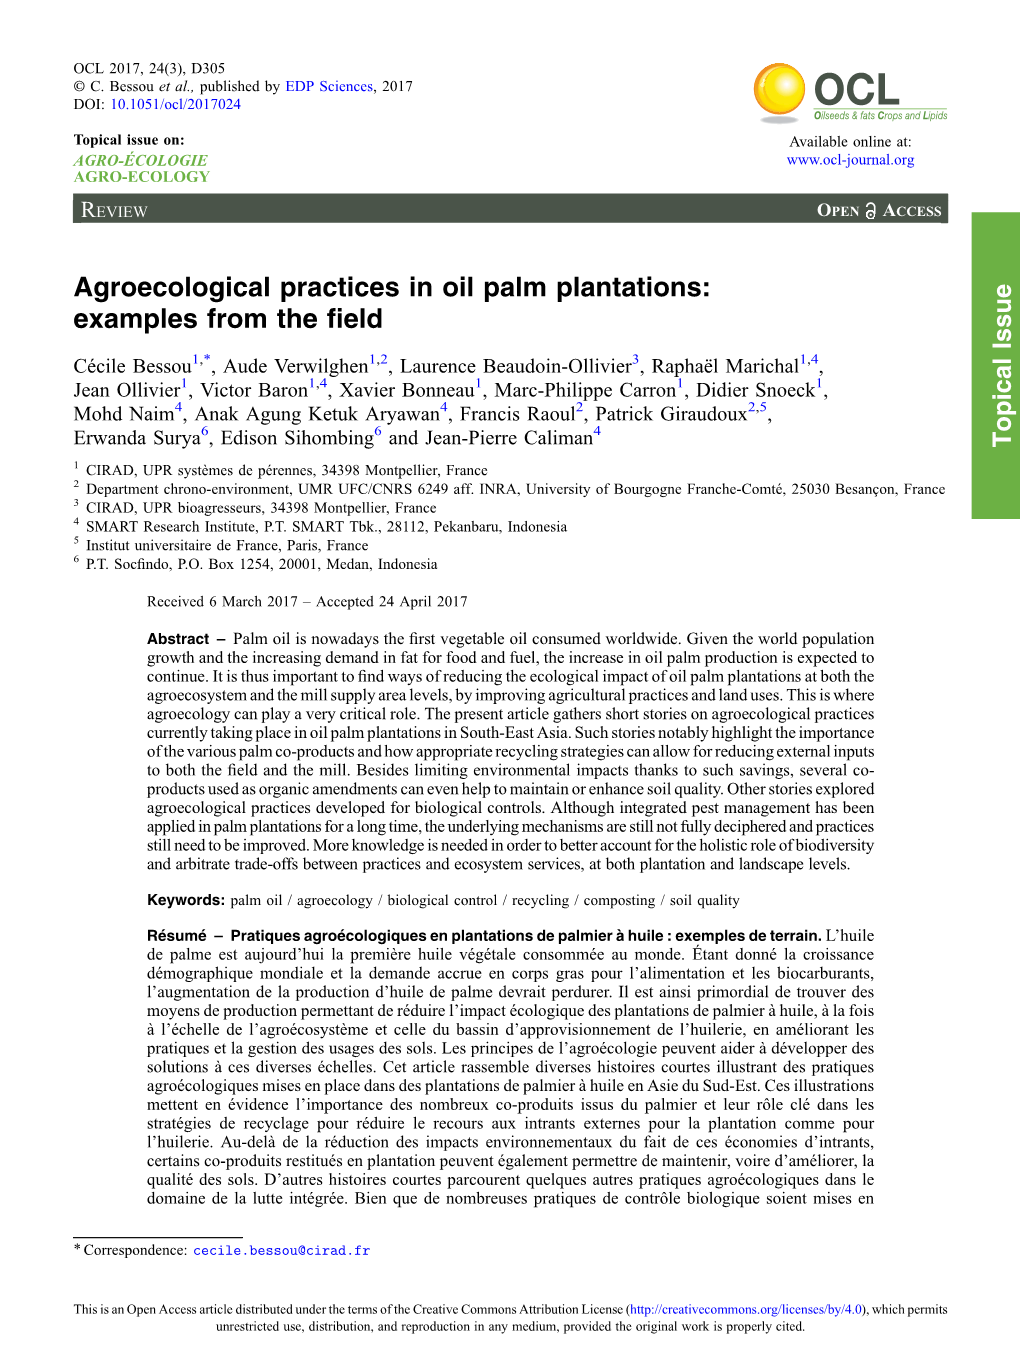 Agroecological Practices in Oil Palm Plantations: Examples from the ﬁeld